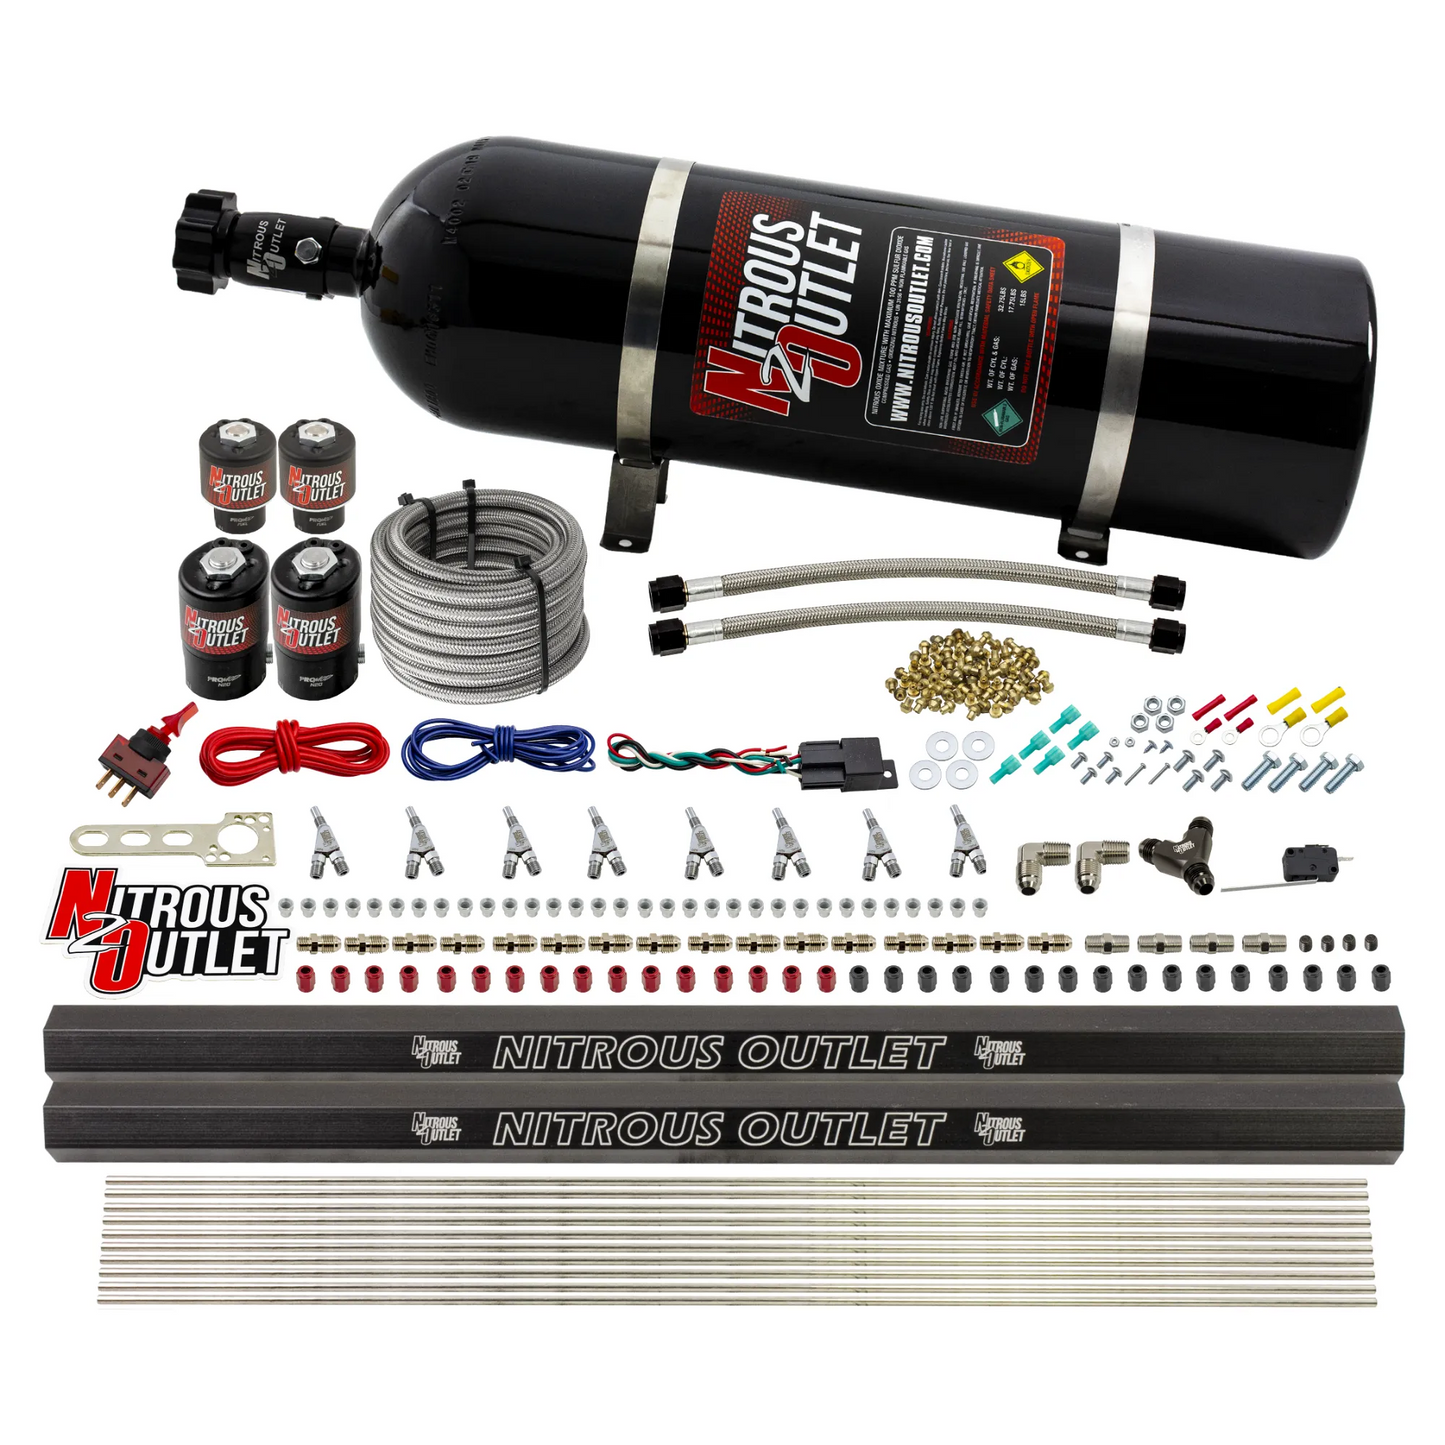 8 Cylinder Single Stage Direct Port Nitrous System with Injection Rails - E85 - .122 Nitrous/.177 Fuel - 45-55 PSI - Straight Blow Through Nozzles